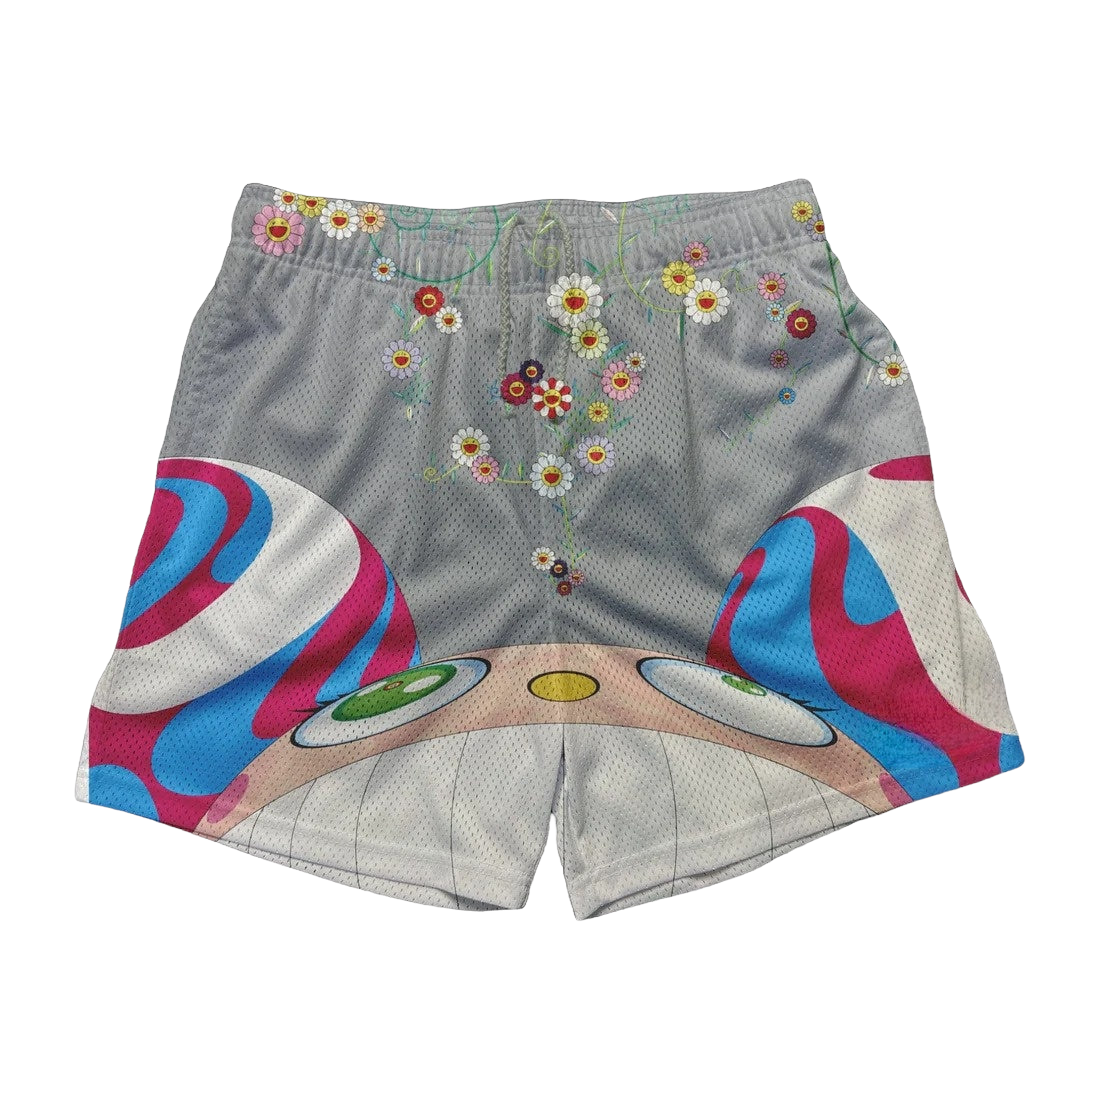 a pair of shorts with a colorful design on it